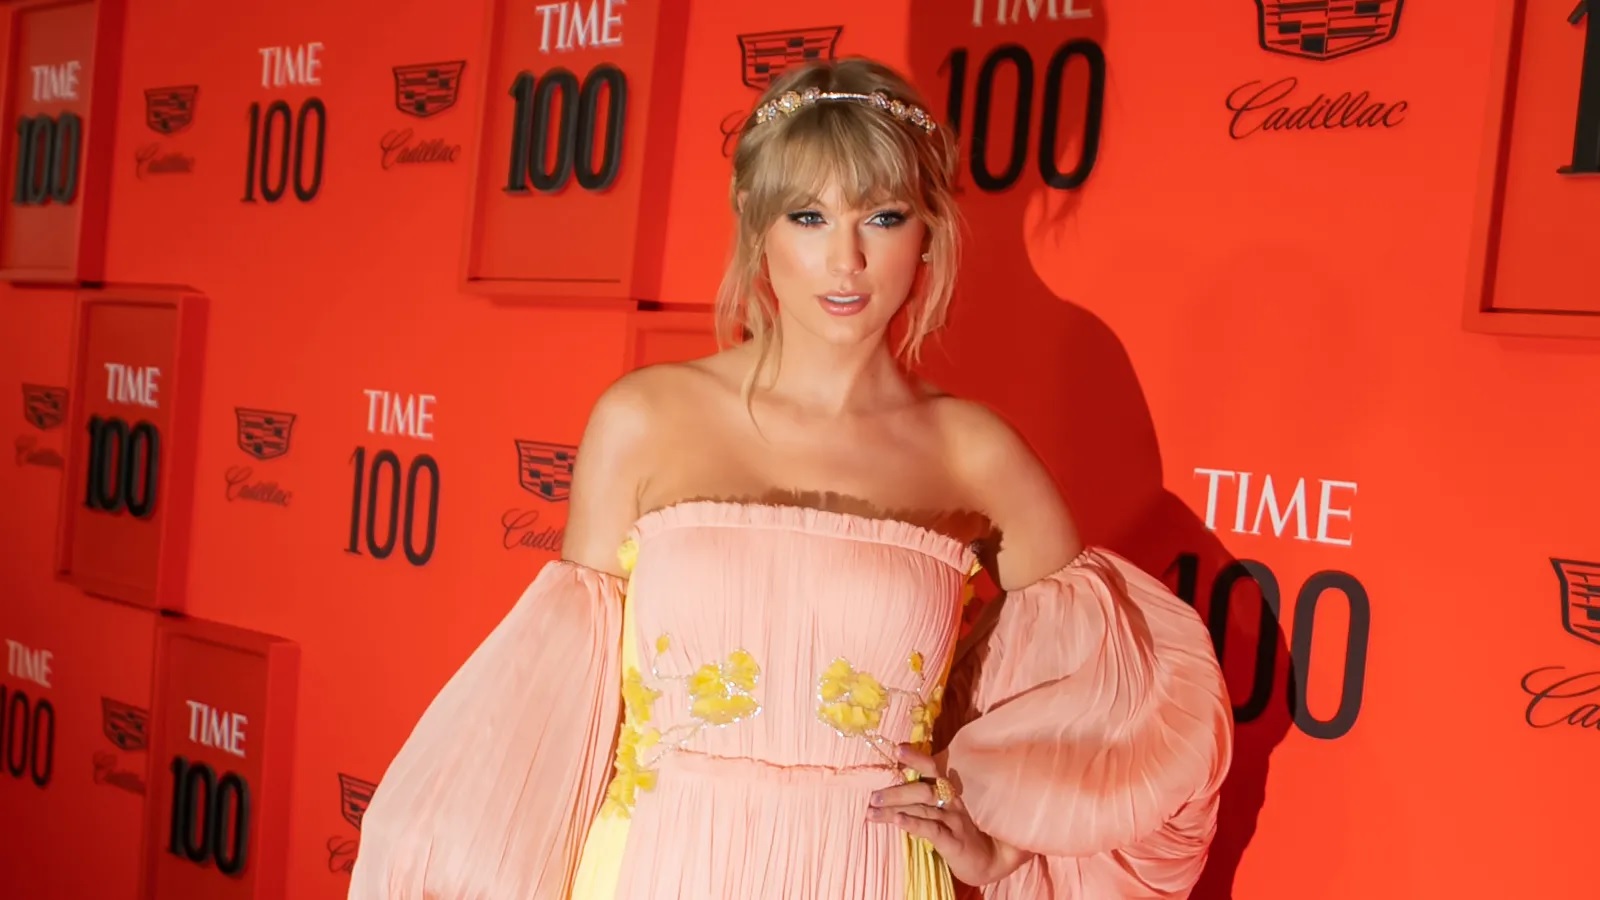 Taylor Swift in Time 100